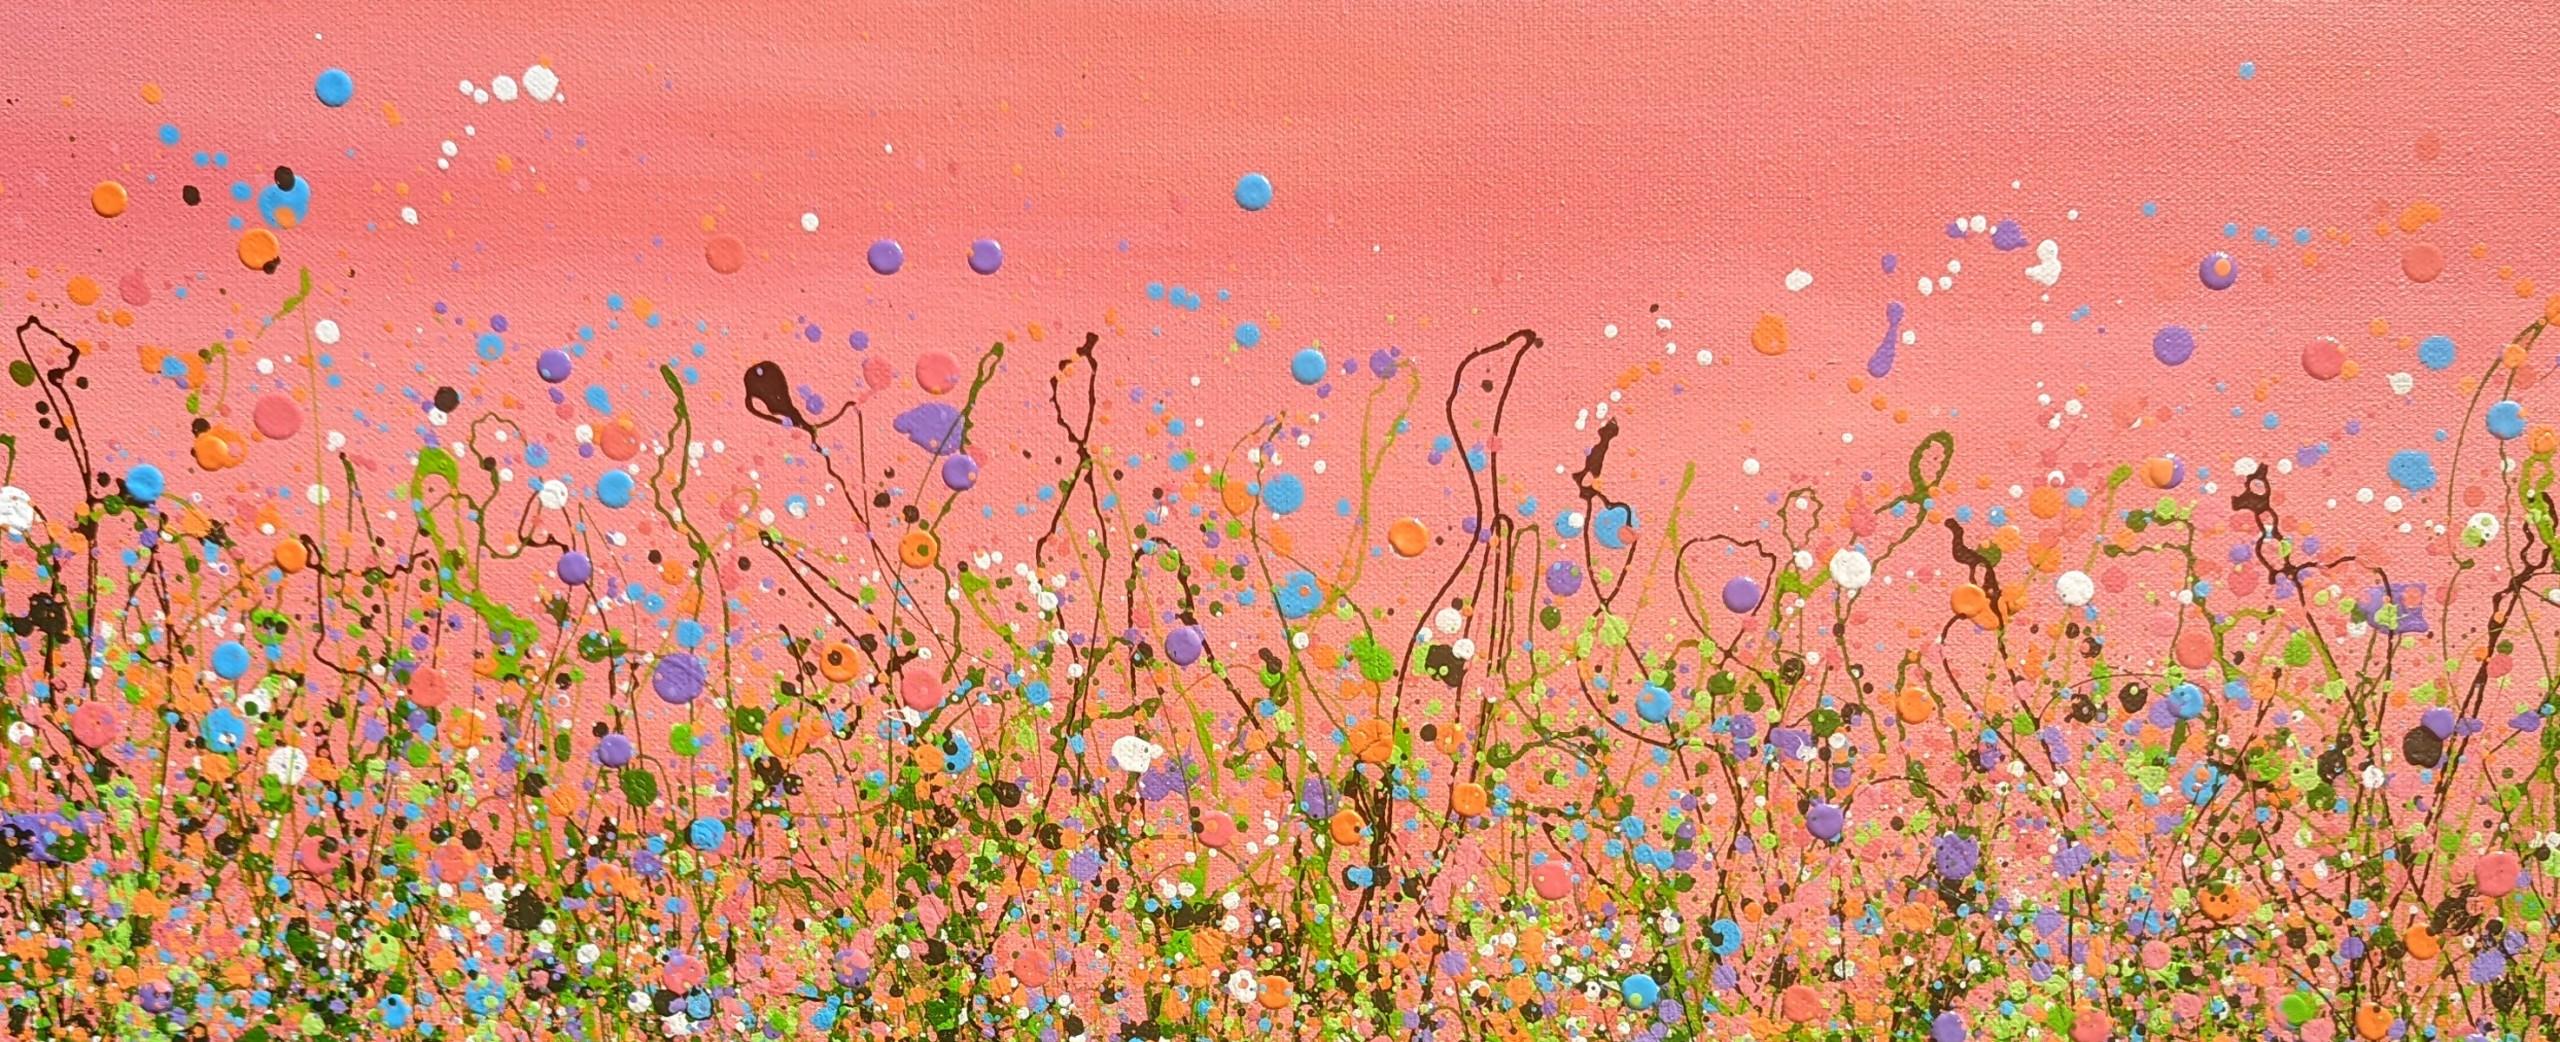 Flamingo Sky Meadows #5 by Lucy Moore, Floral, Wildflowers, Contemporary art - Brown Landscape Painting by Lucy Moore 